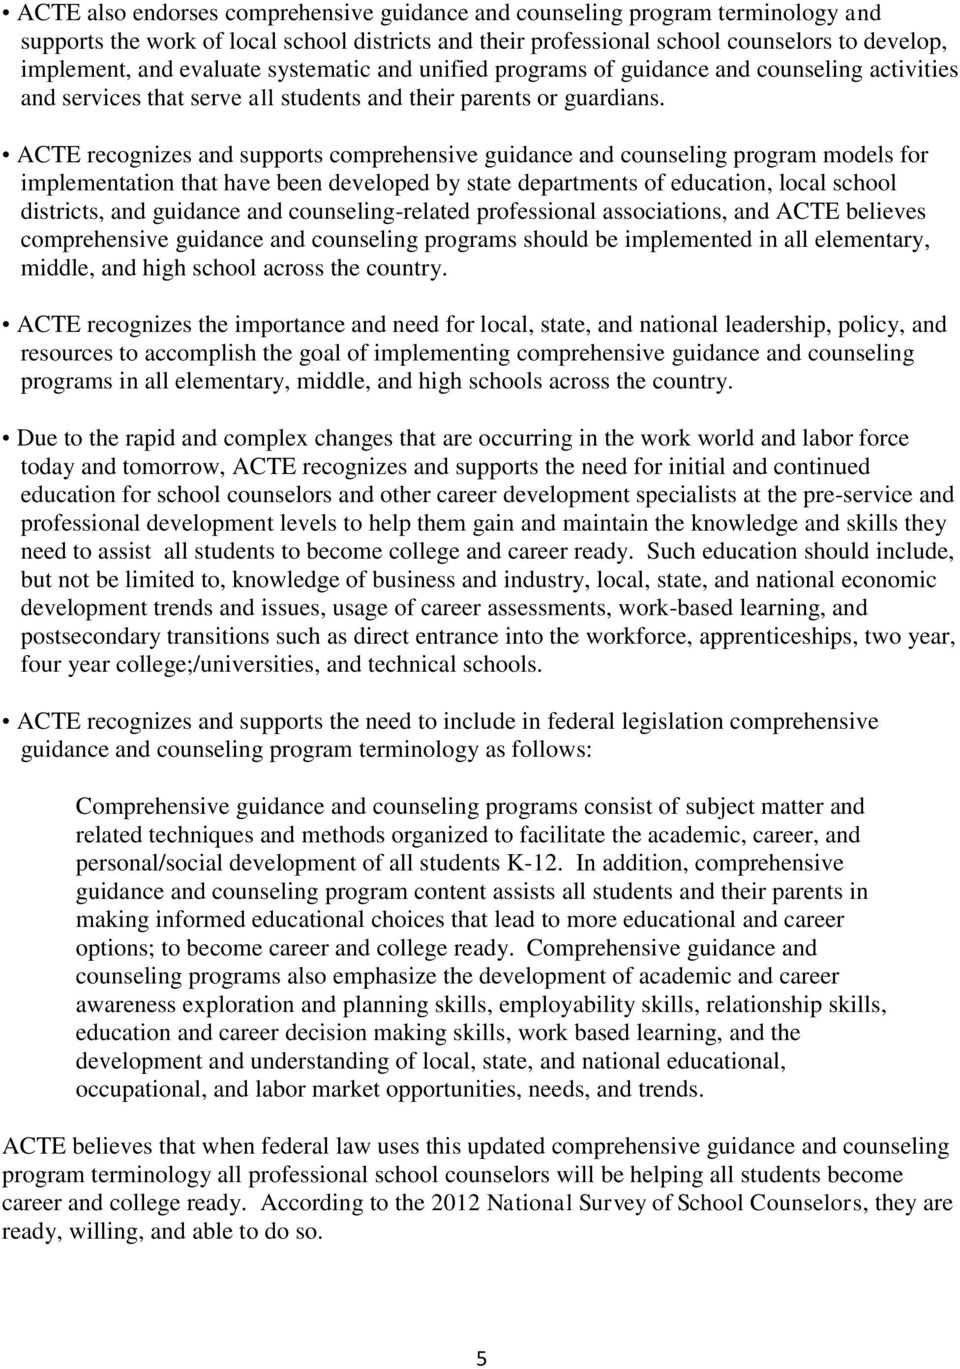 ACTE recognizes and supports comprehensive guidance and counseling program models for implementation that have been developed by state departments of education, local school districts, and guidance